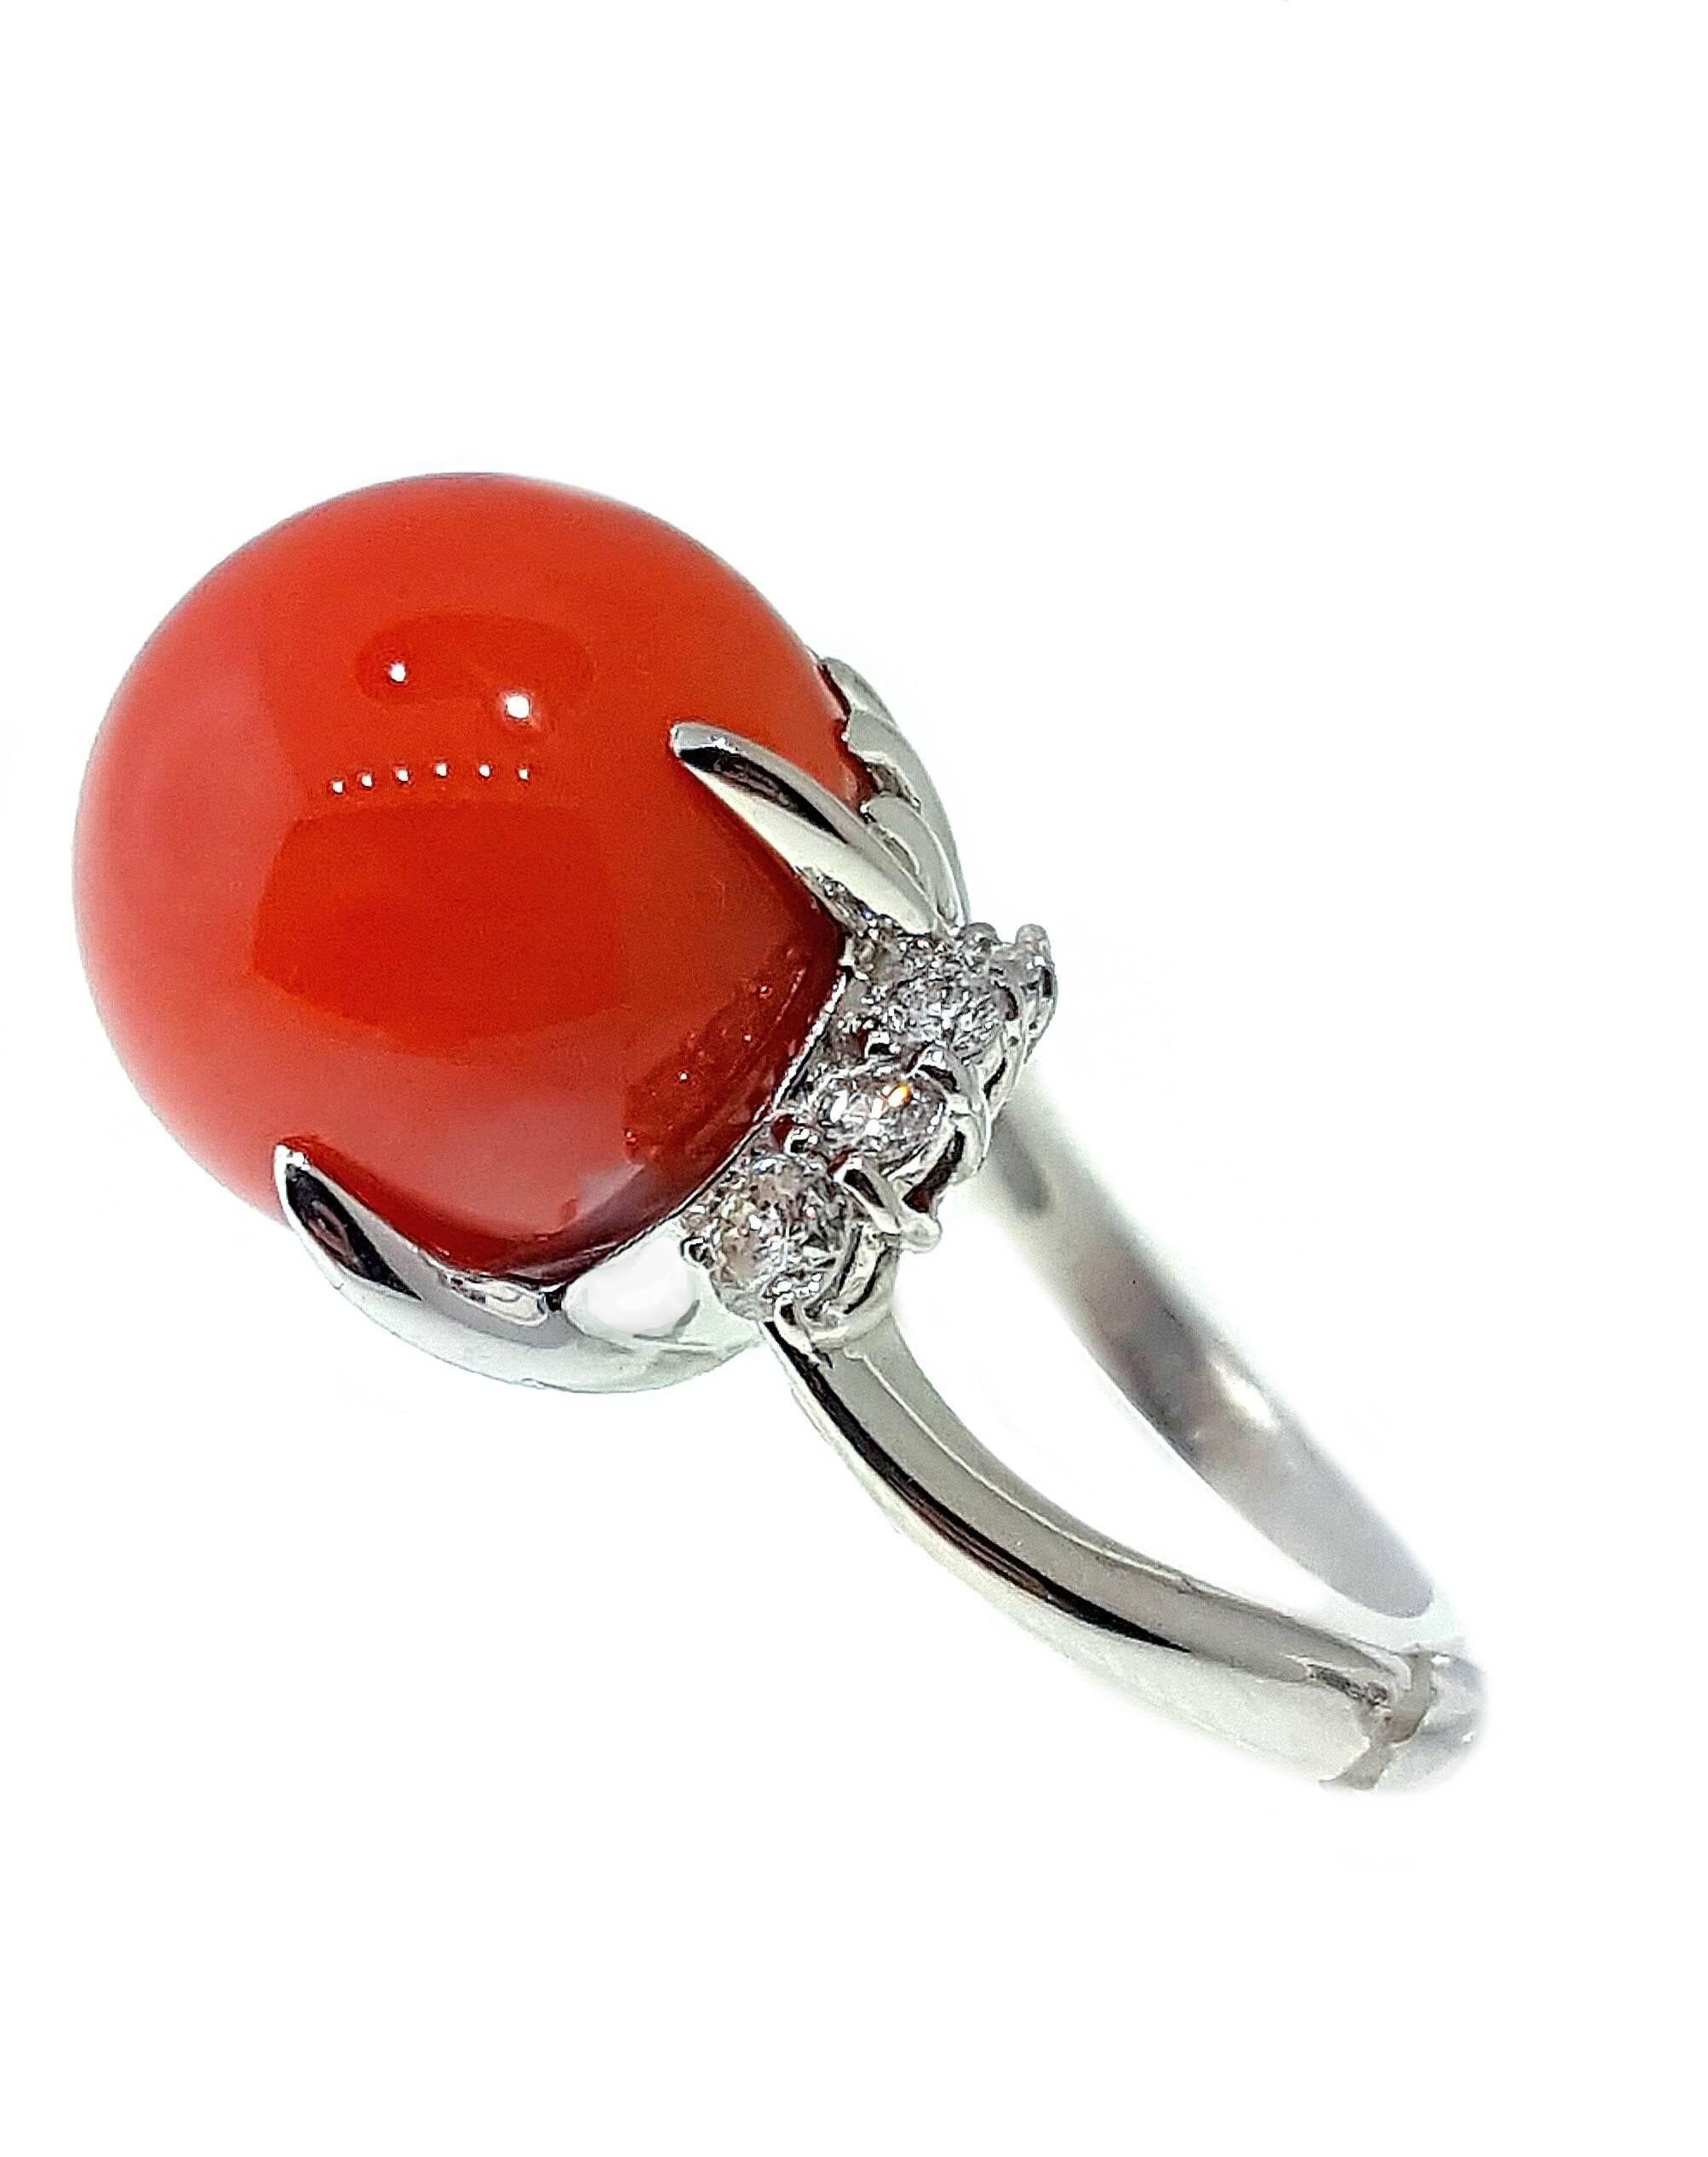 Striking high polished platinum ring featuring a 21.81ct, 14.6mm red coral ball accented by 2 waves of graduated full cut, round brilliant diamonds totaling .39ct. The diamonds are approximately SI1-2 in clarity and H-I in color.  The ring is a US